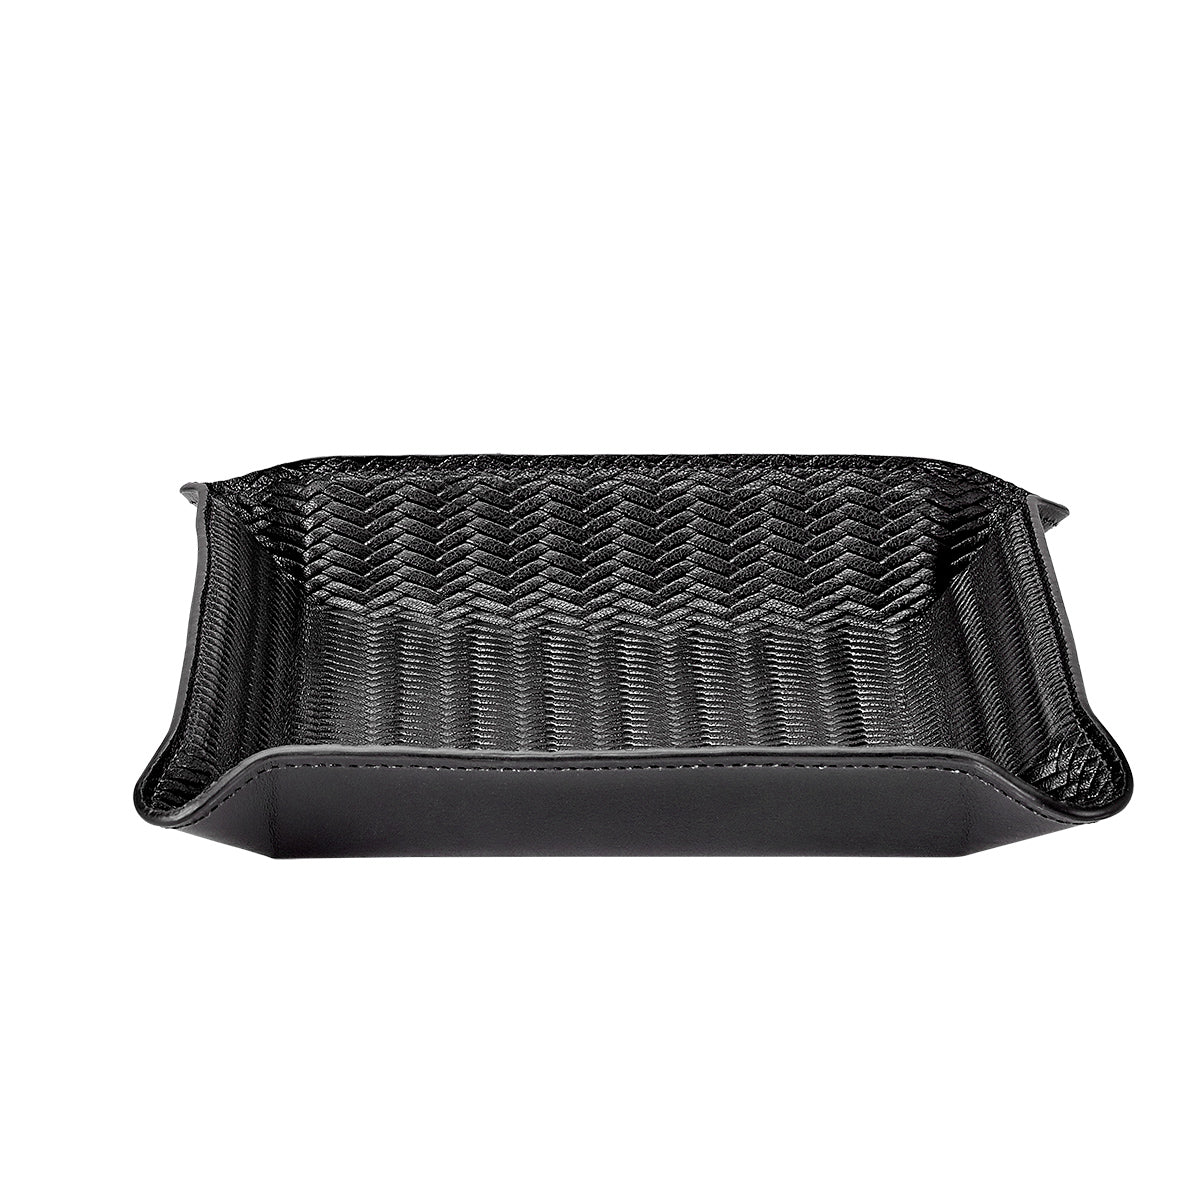 Graphic Image Medium Leather Catchall Tray Black Woven Leather